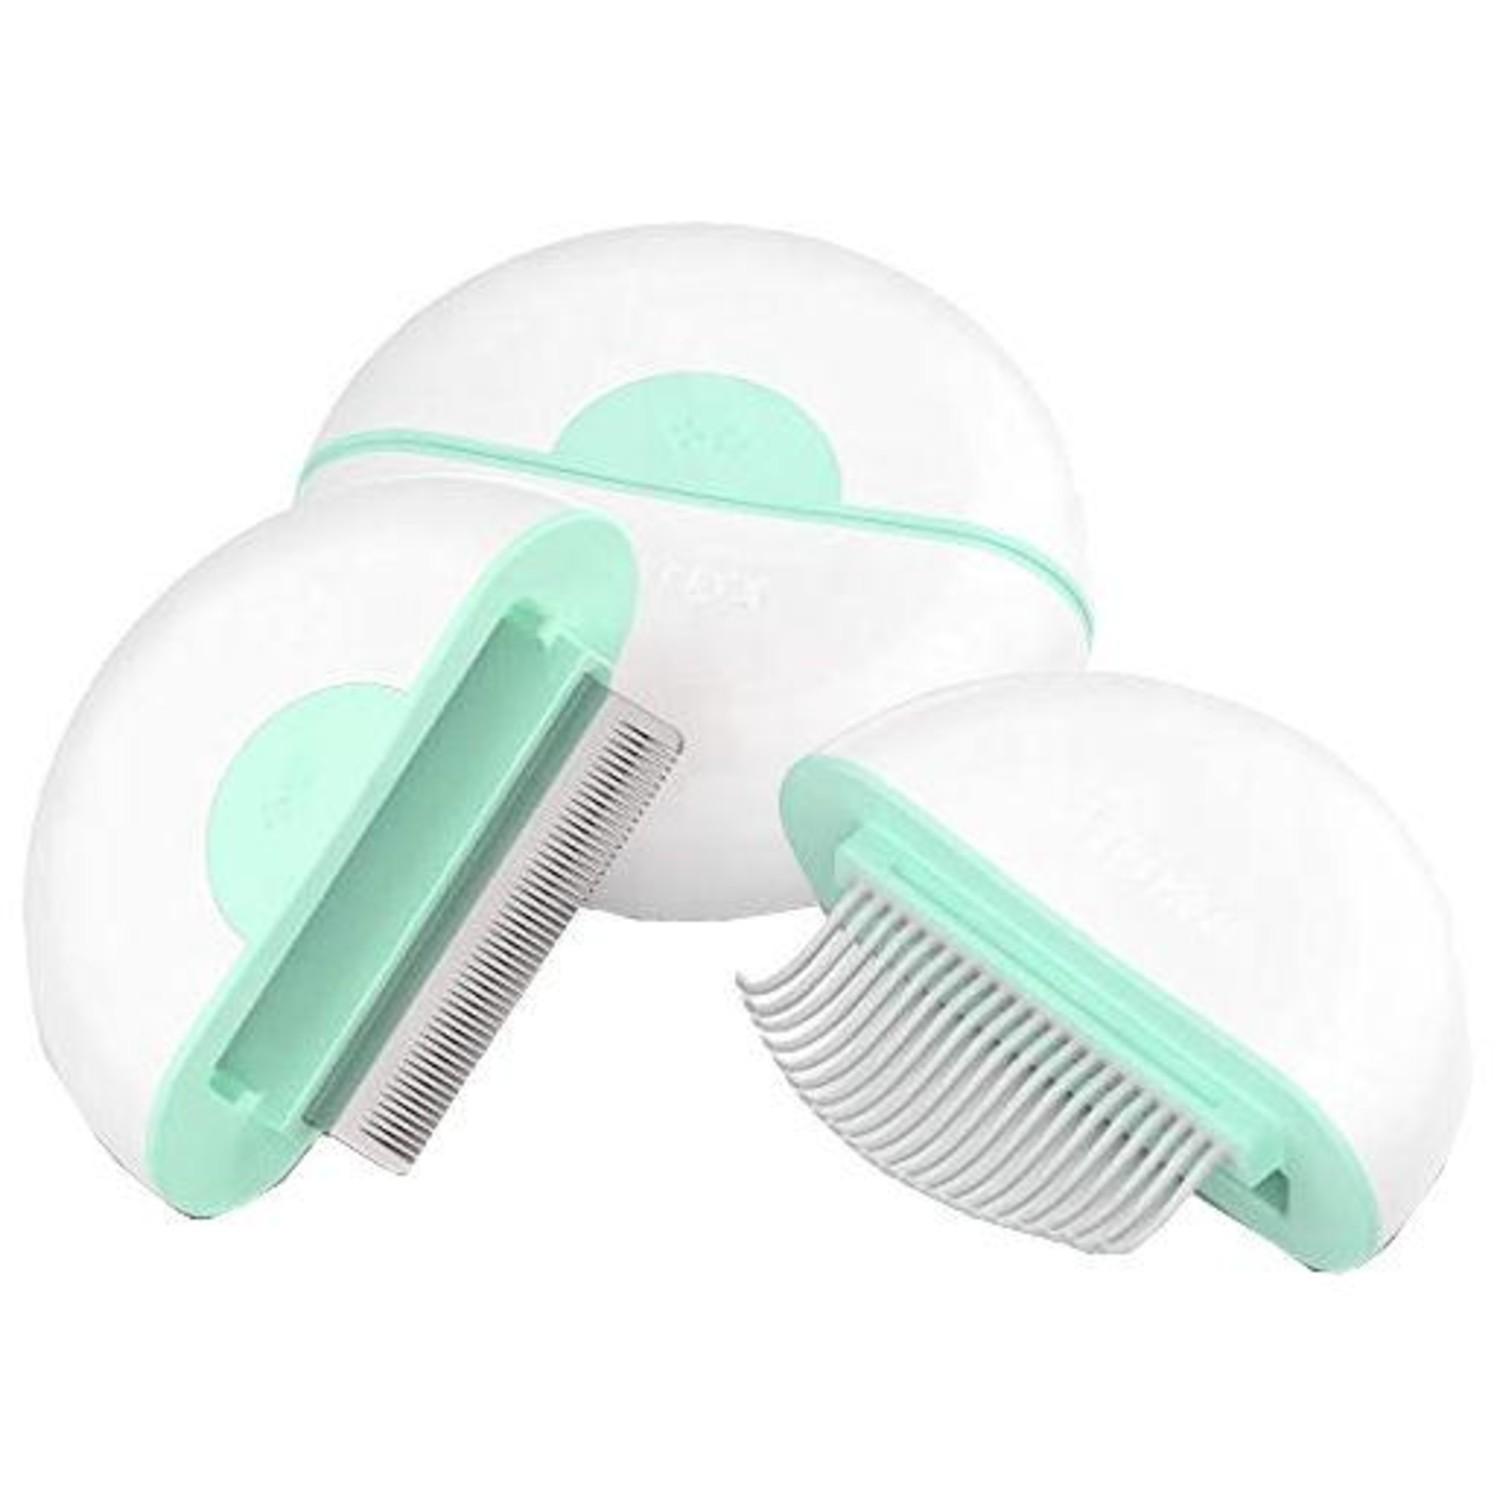 Pet Life LYNX 2-in-1 Travel Connecting Grooming Pet Comb and Deshedder - Green